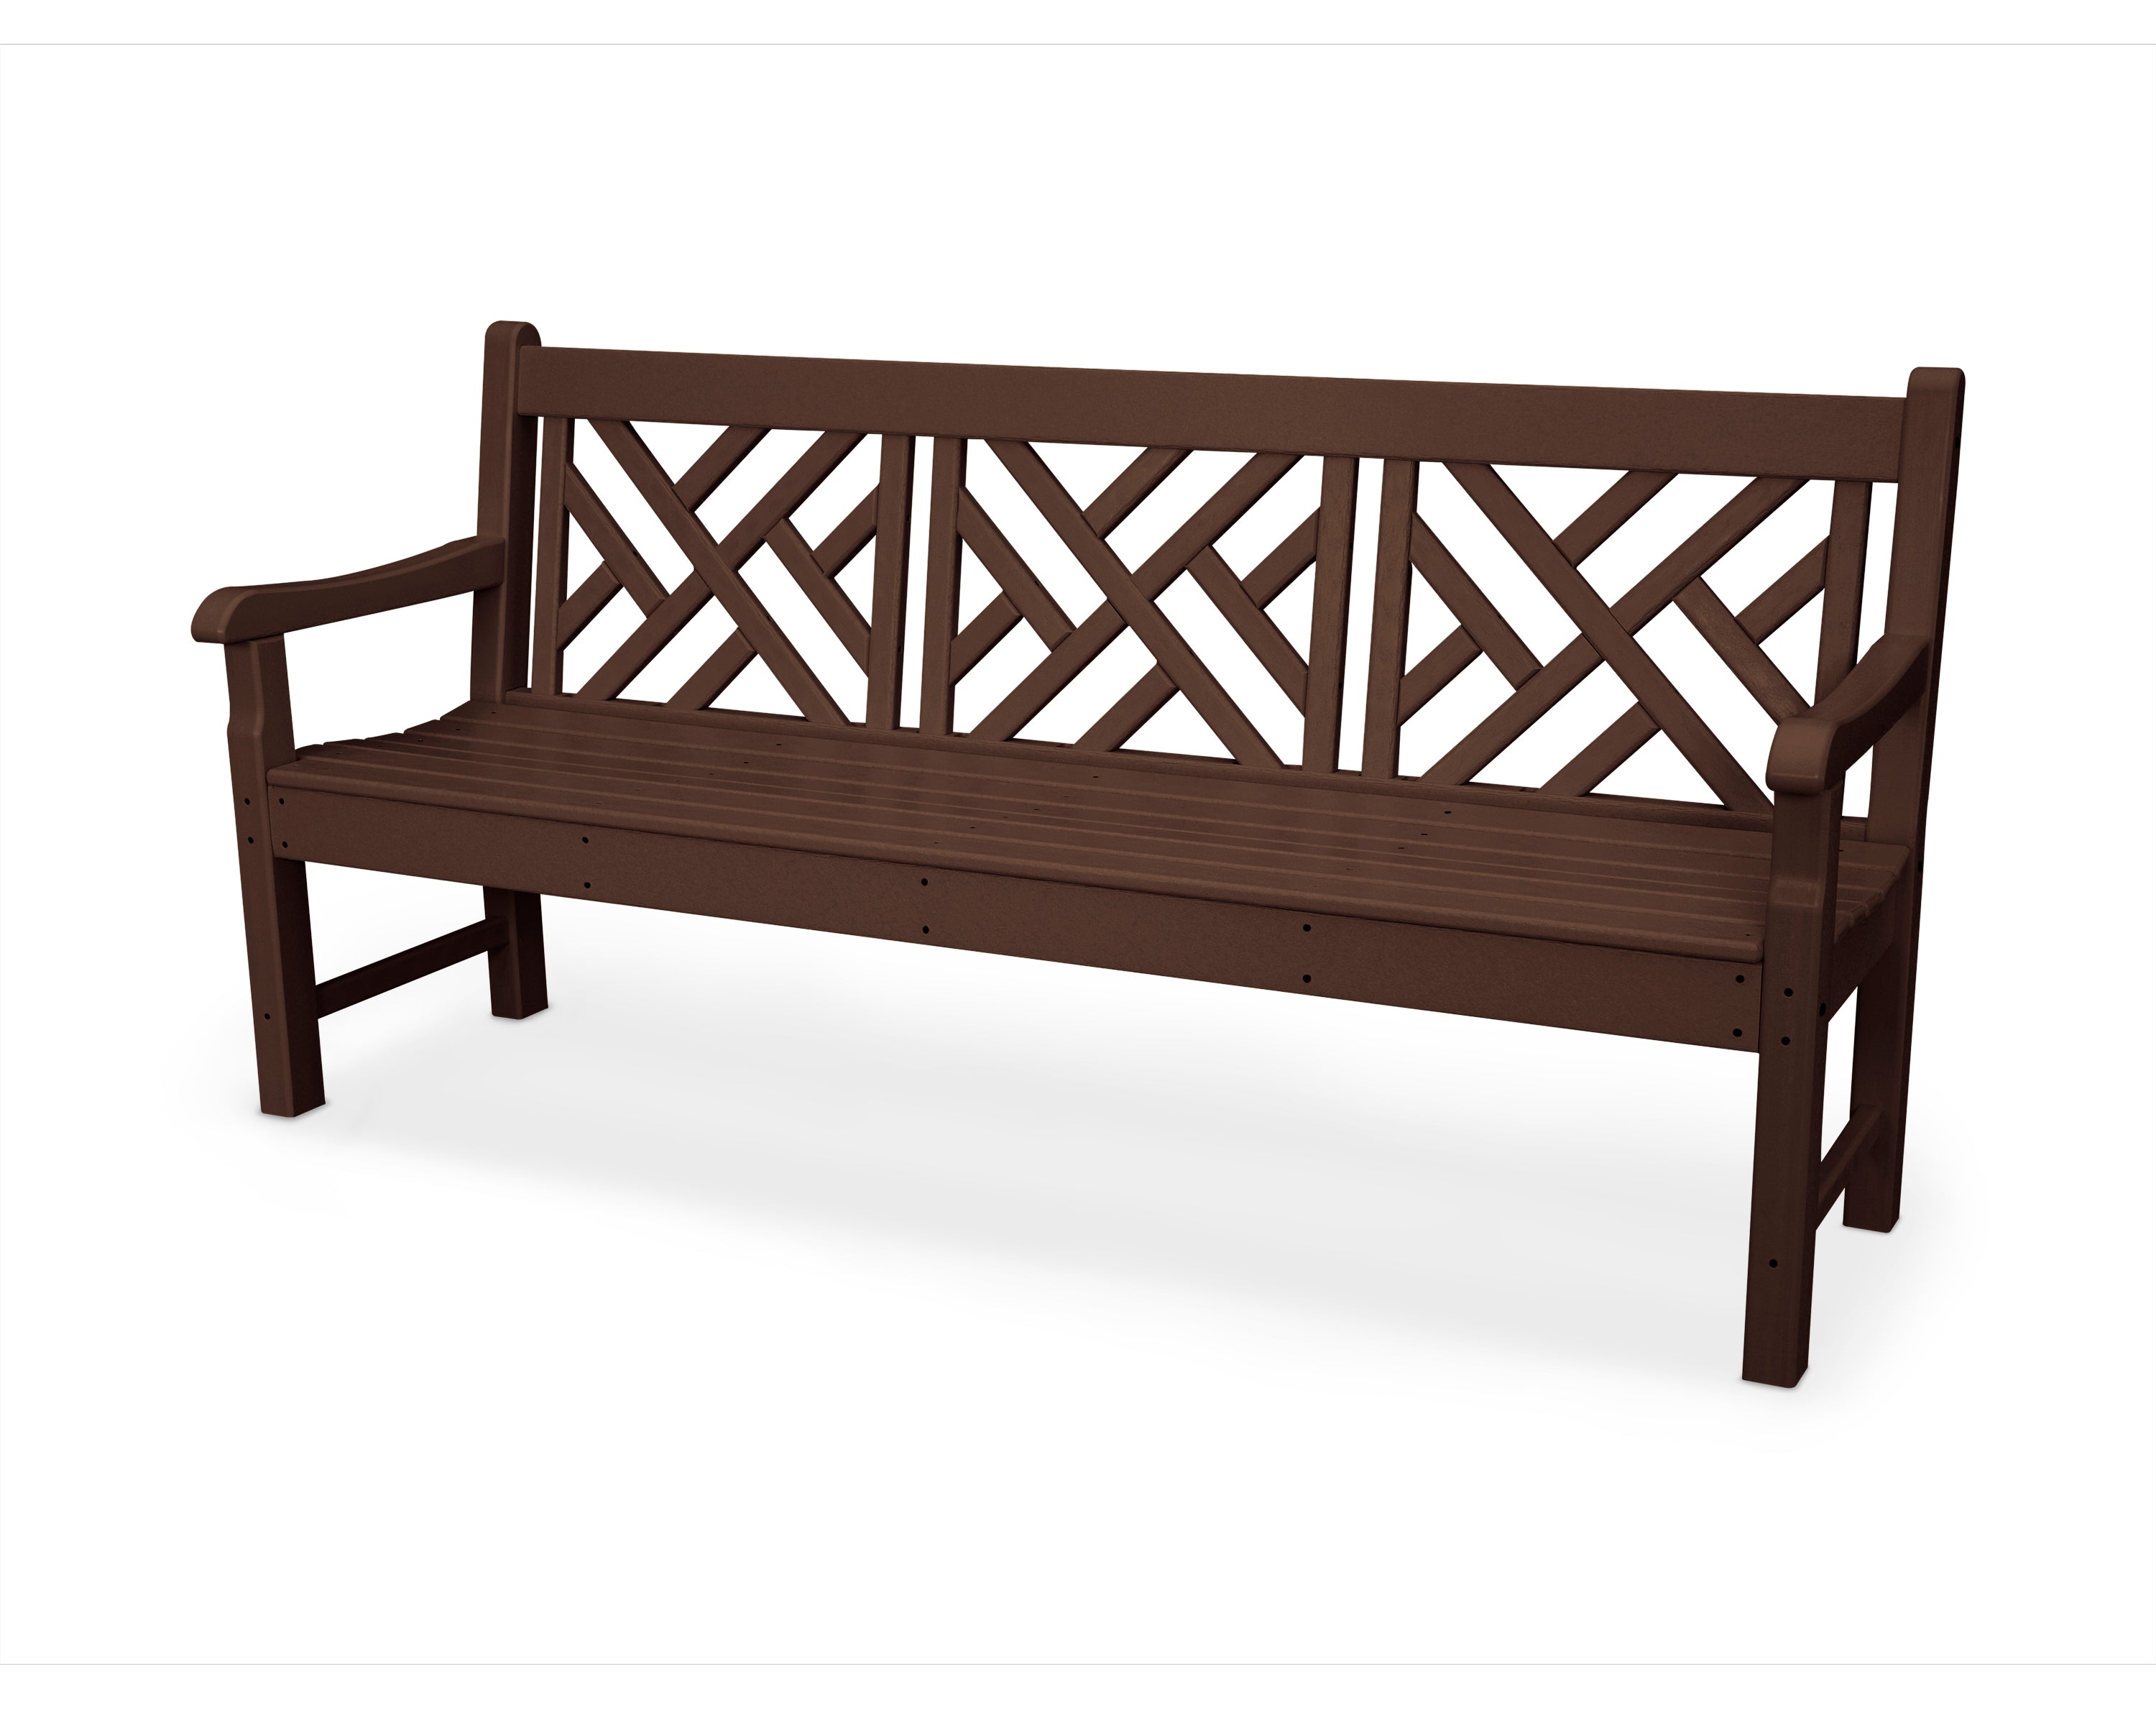 POLYWOOD® Rockford 72" Chippendale Bench in Mahogany